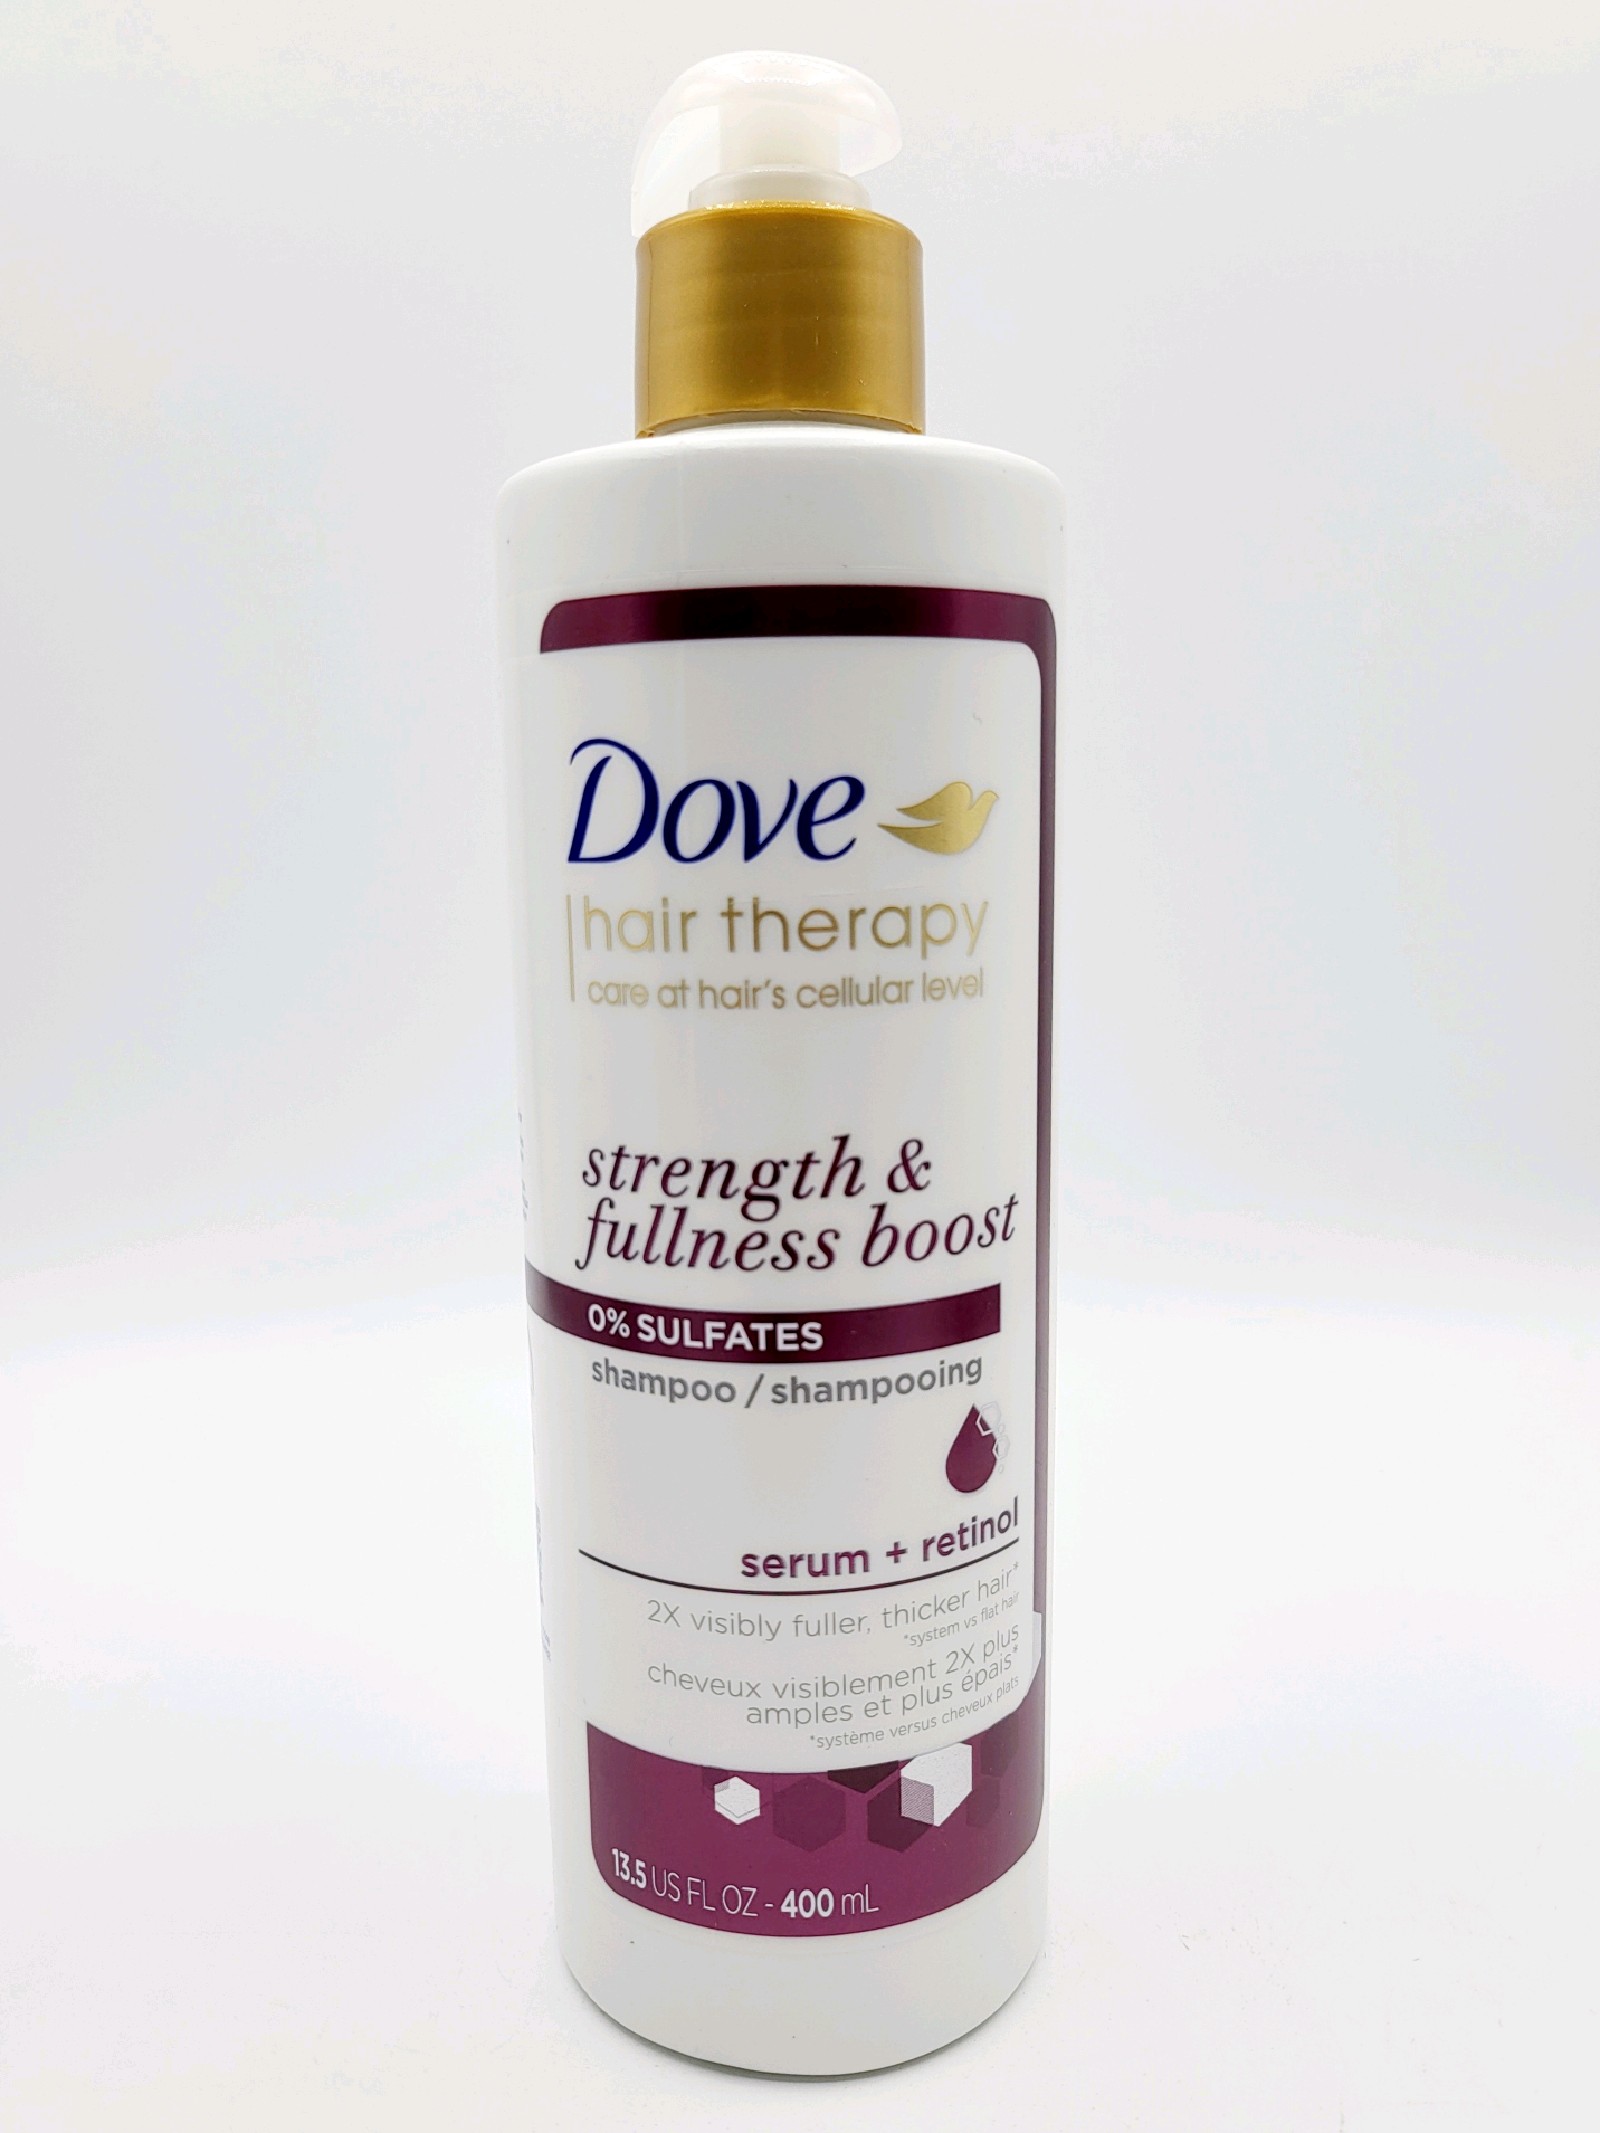 Dove Hair Therapy Strength & Fullness Boost